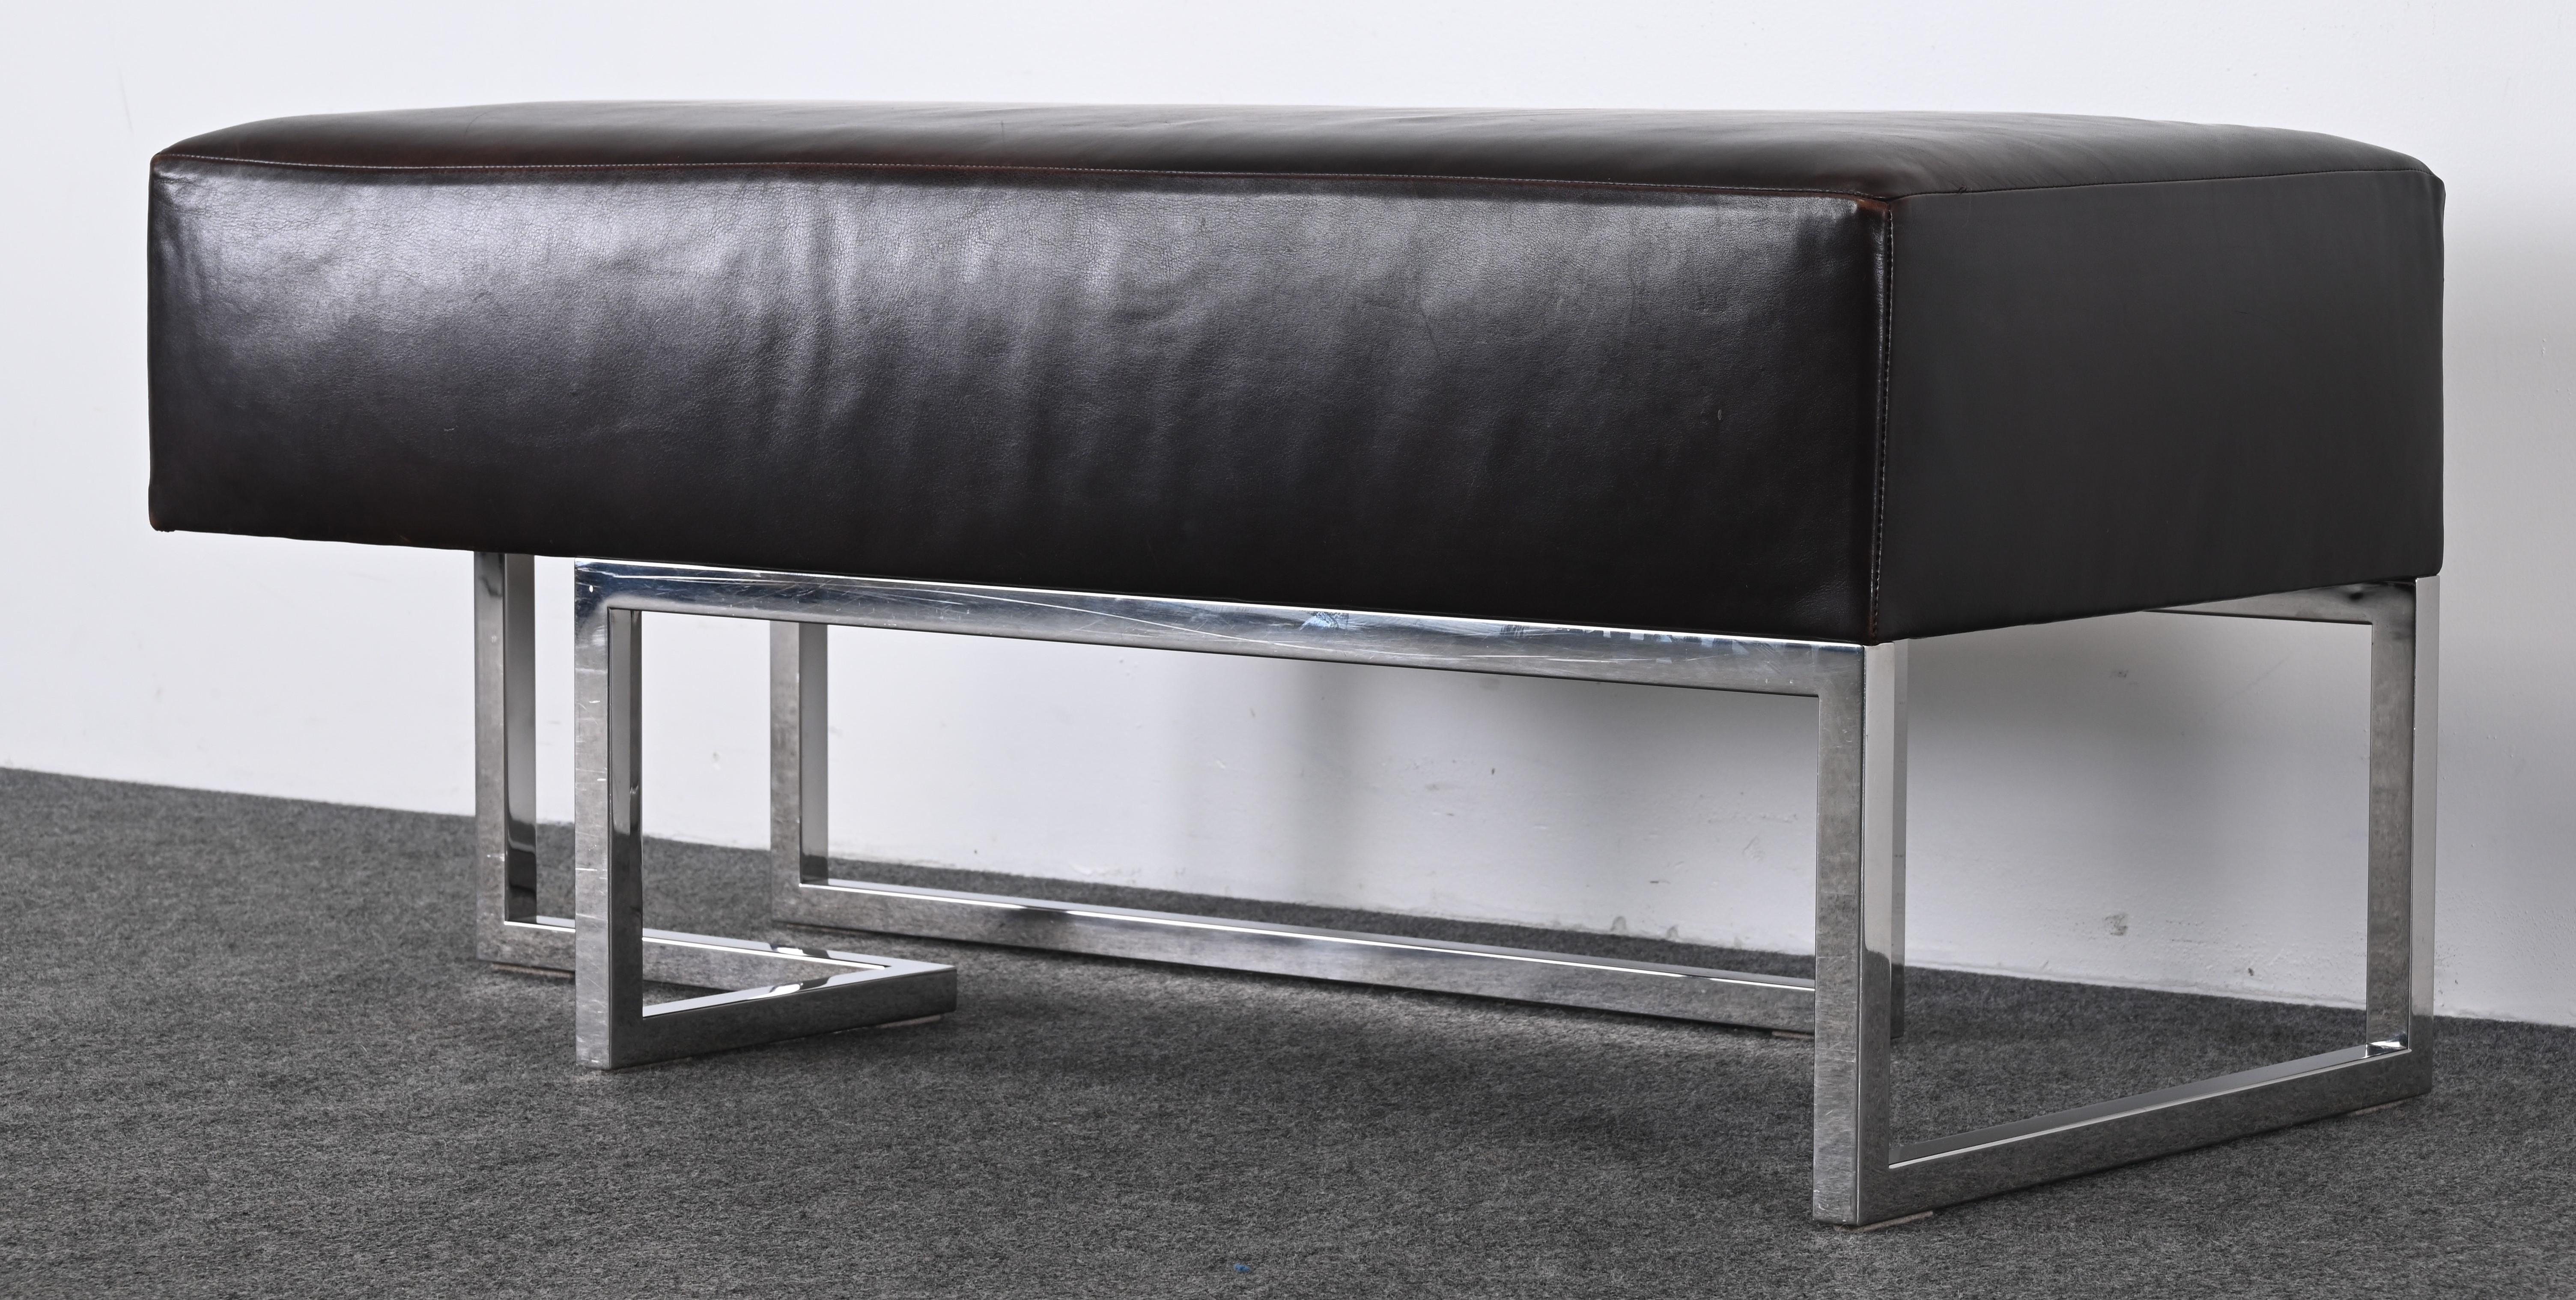 Late 20th Century Leather and Stainless Steel Bench by Vladimir Kagan for Gucci, 1990s